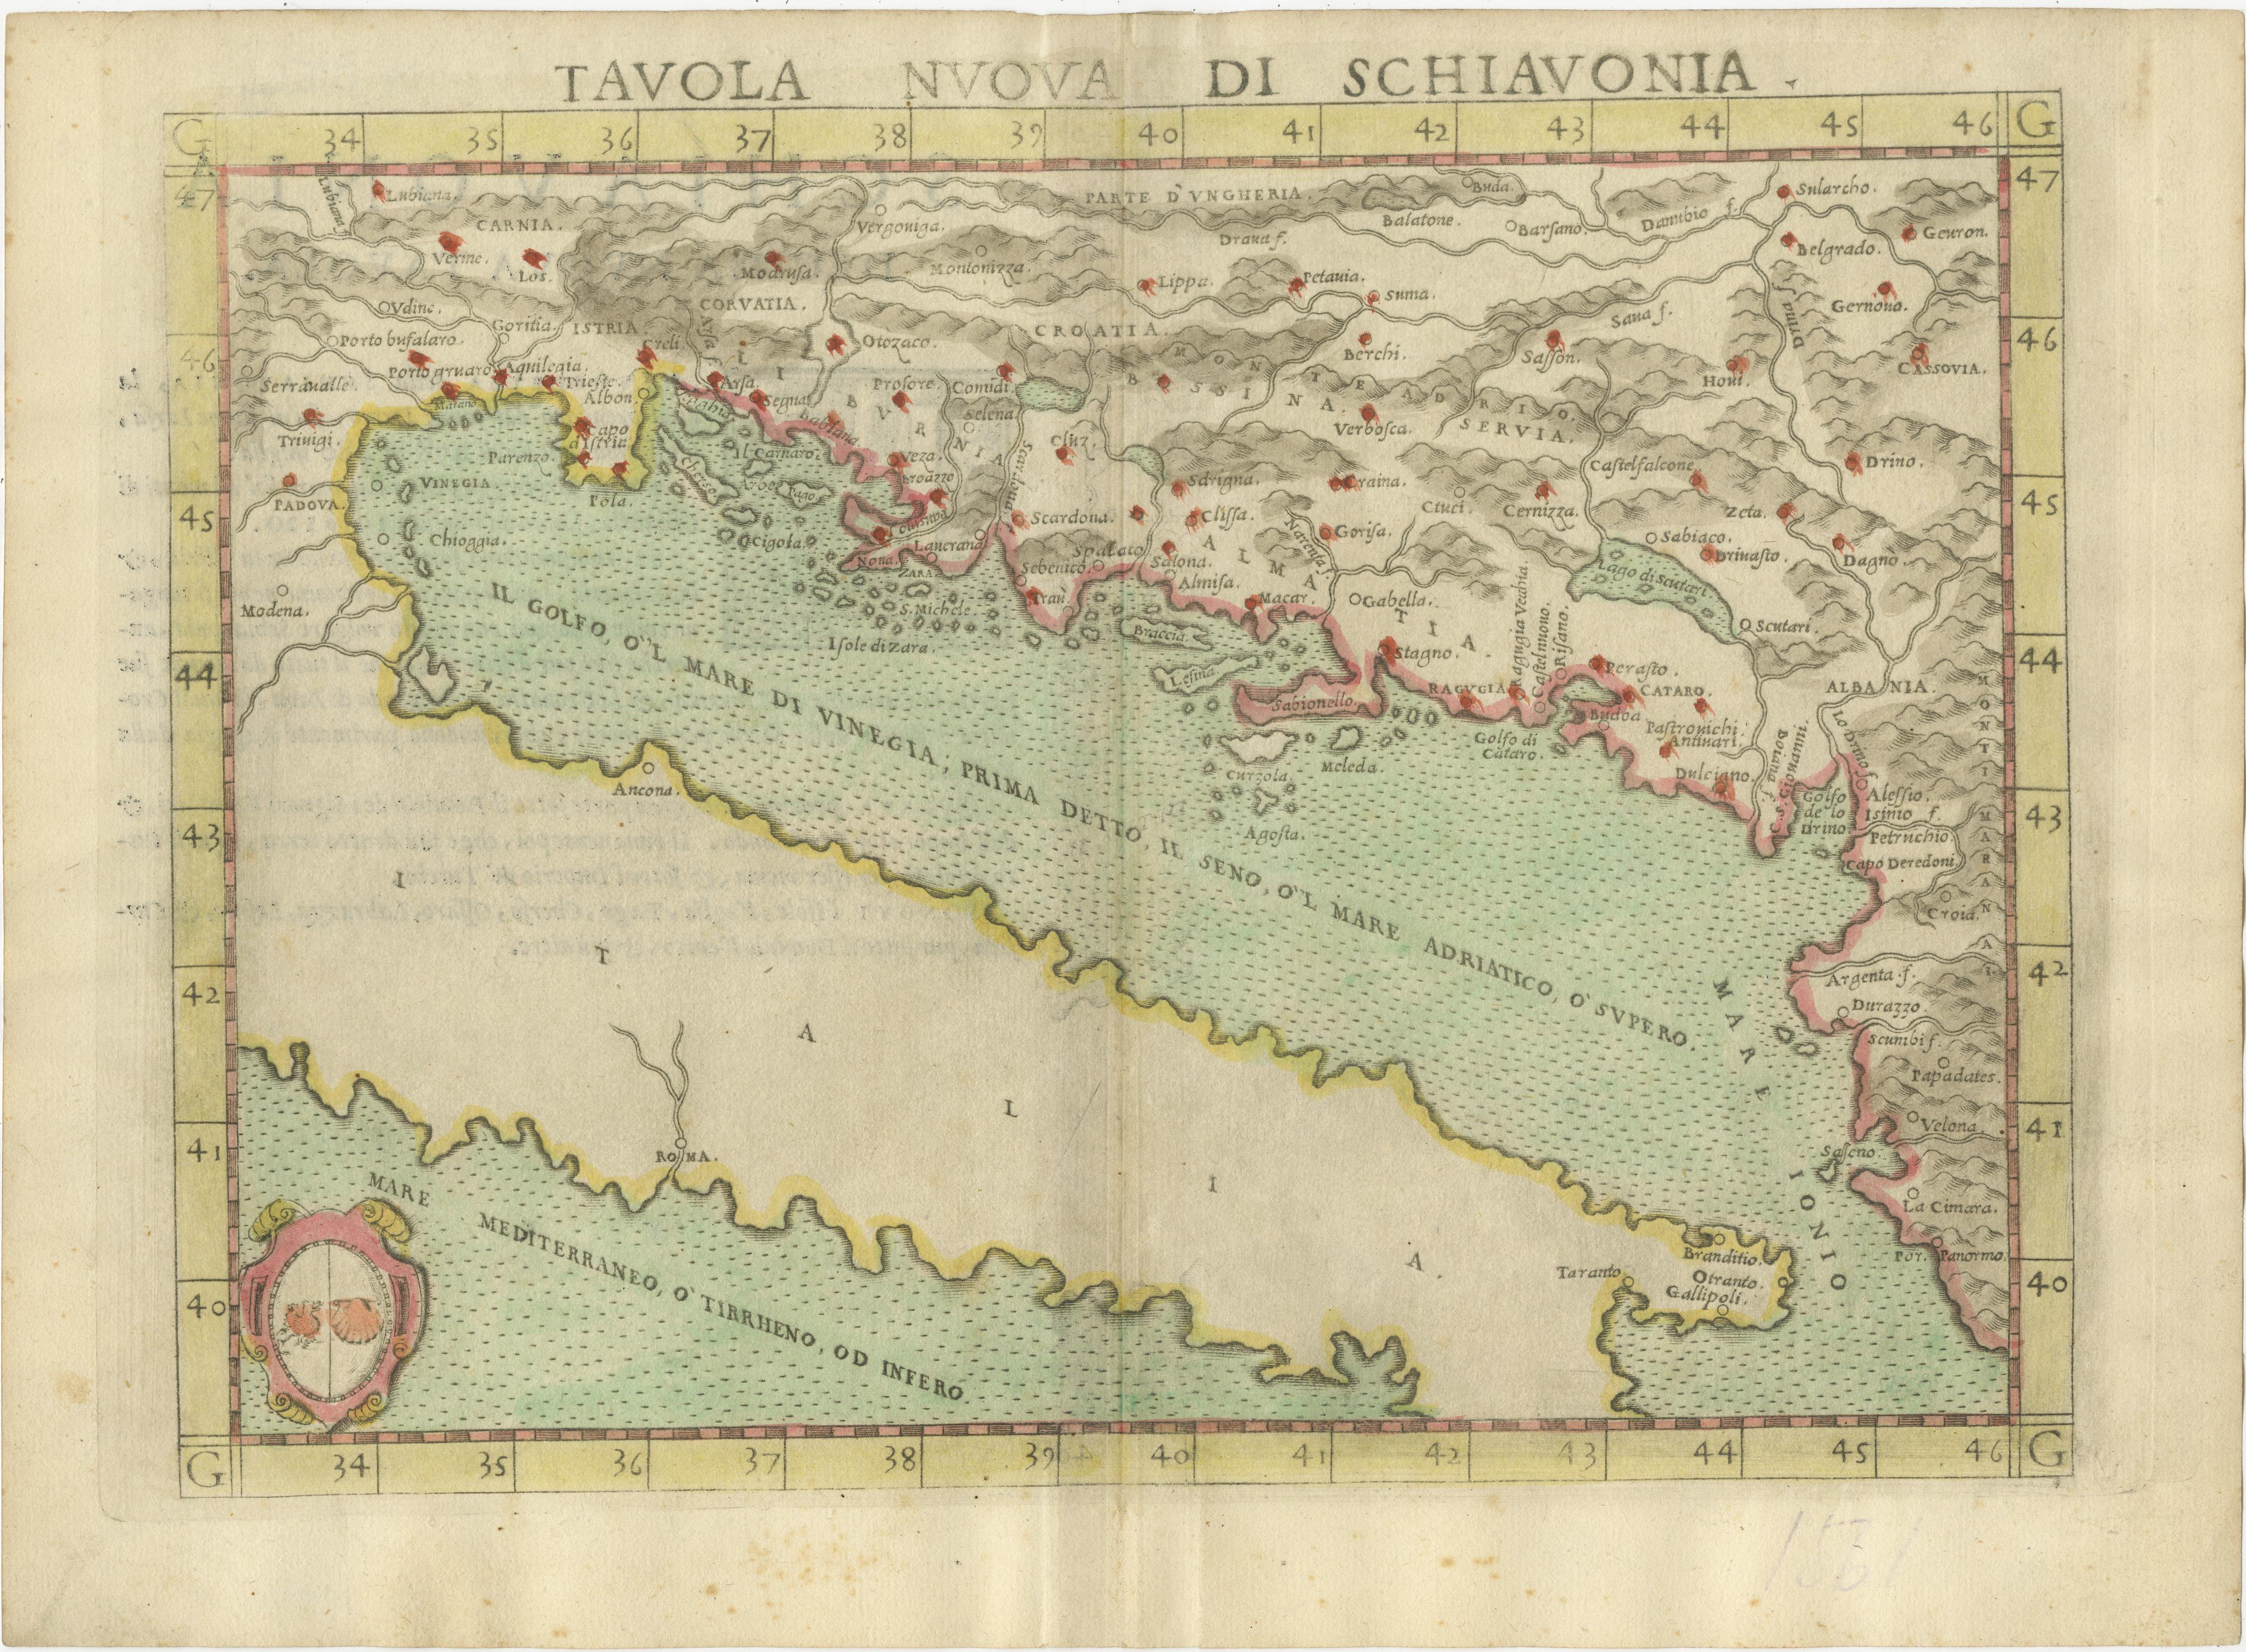 Antique map titled 'Tavola Nuova di Schiavonia'. Ruscelli's map of the Balkans, with a coat of arms. The mountains are represented, river systems are shown in detail, and cities, towns and ports denoted throughout this 16th century map. A number of